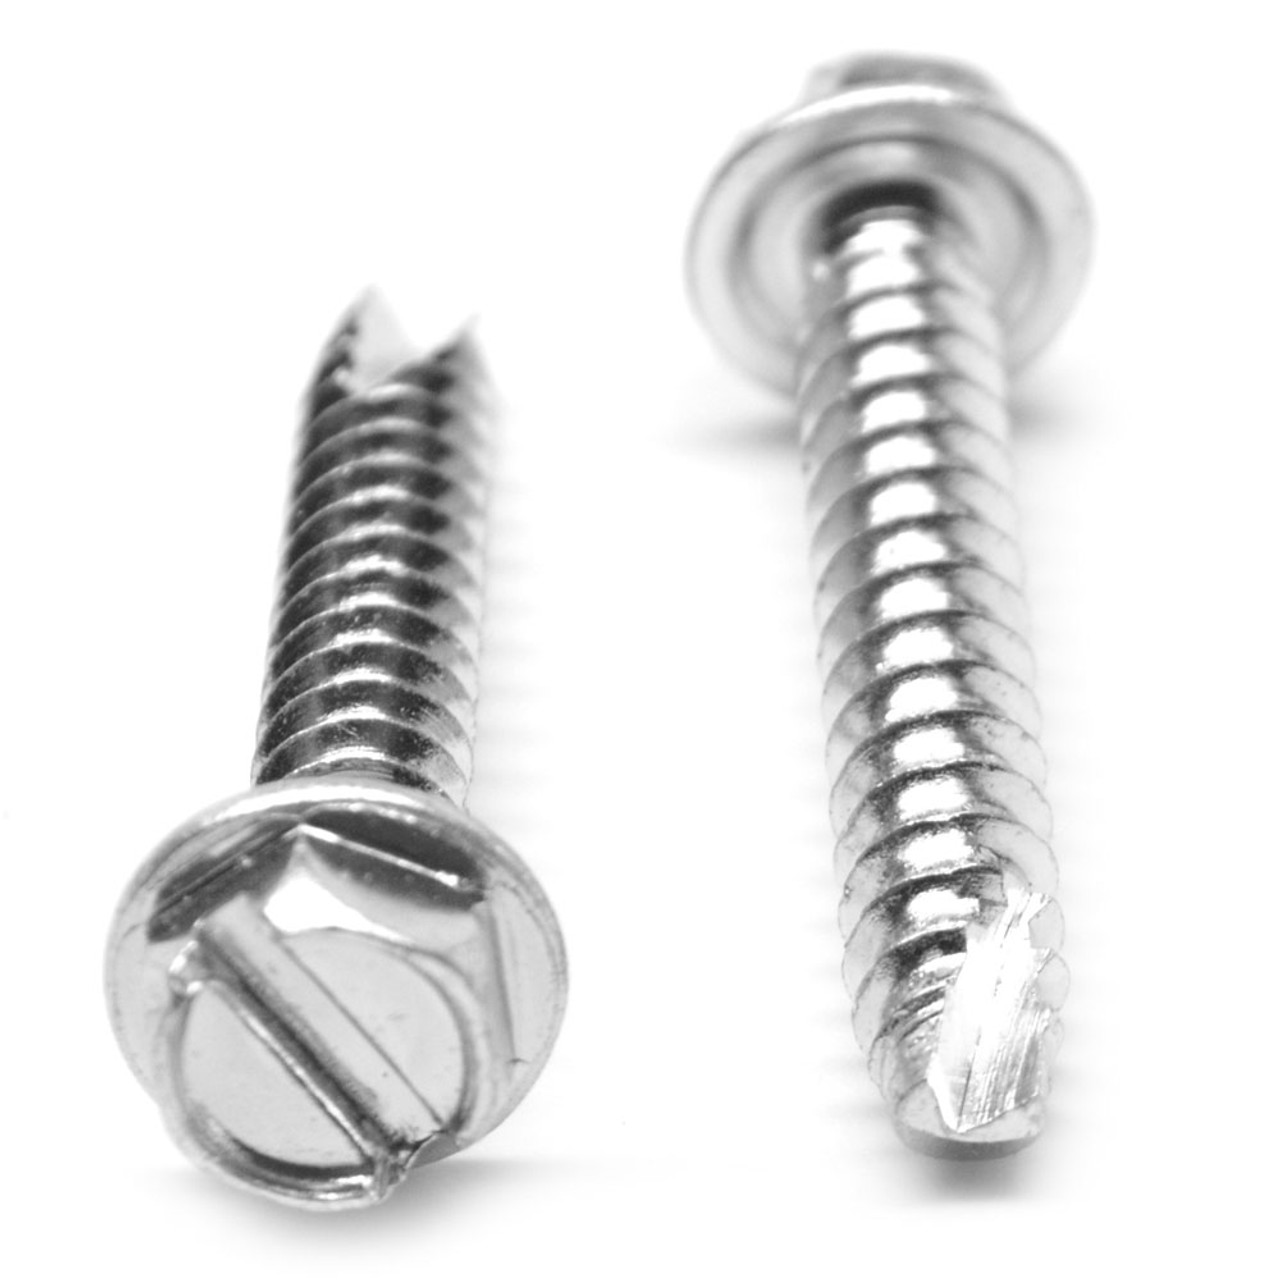 #10-16 x 5/8" (FT) Coarse Thread Thread Cutting Screw Slotted Hex Washer Head Type 25 Low Carbon Steel Zinc Plated